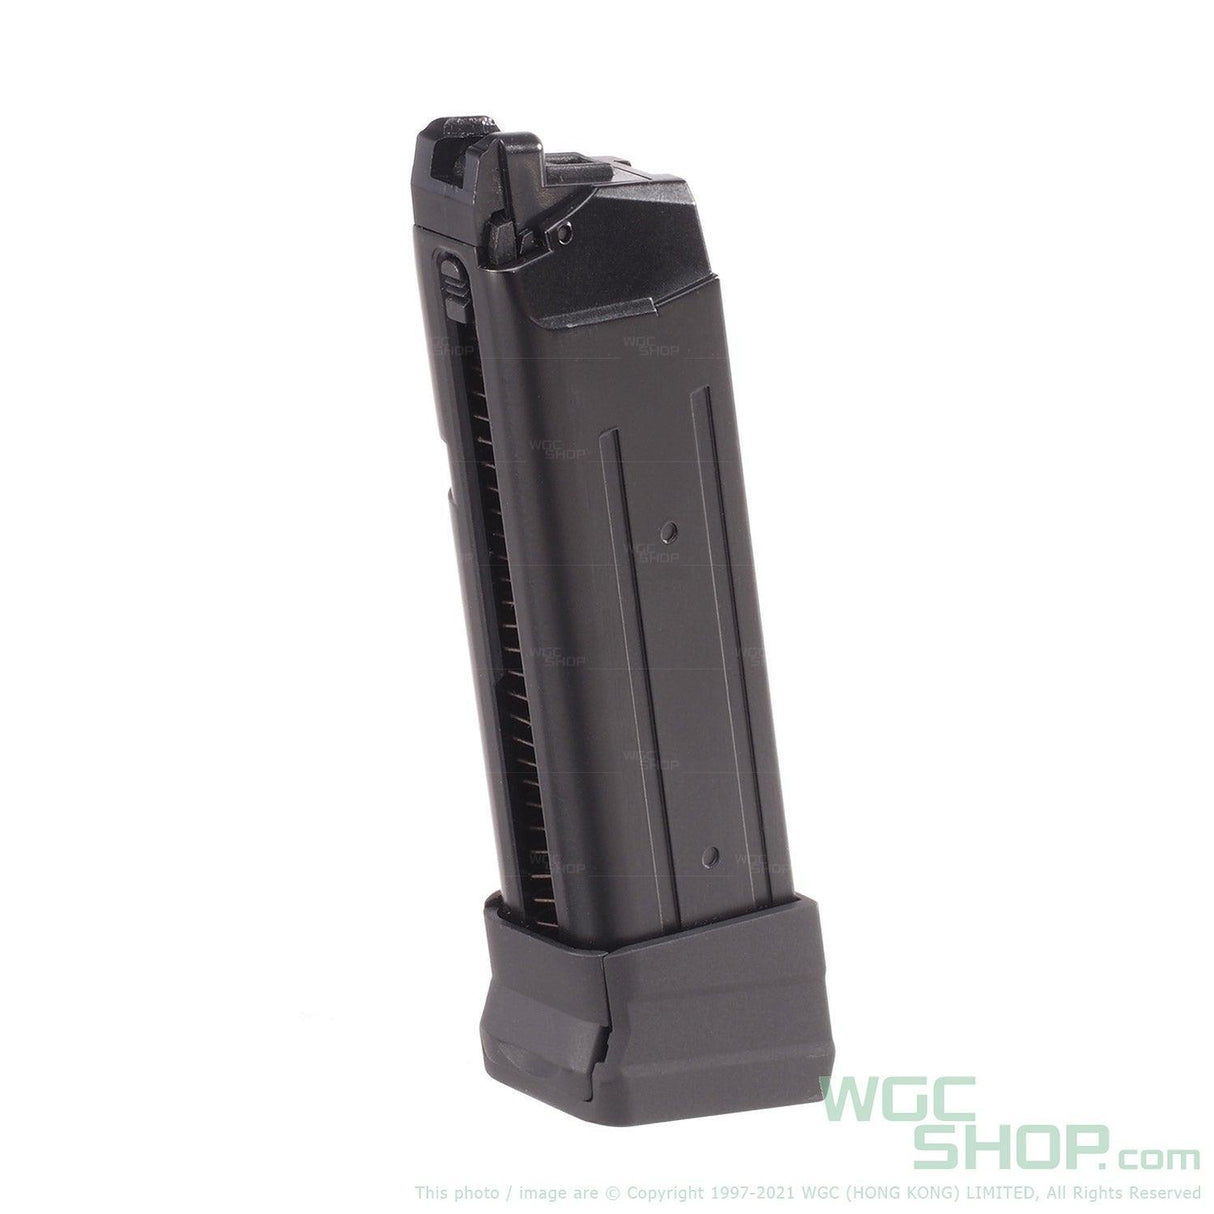 APS EMG F1 Firearms Licensed GBB Airsoft - WGC Shop